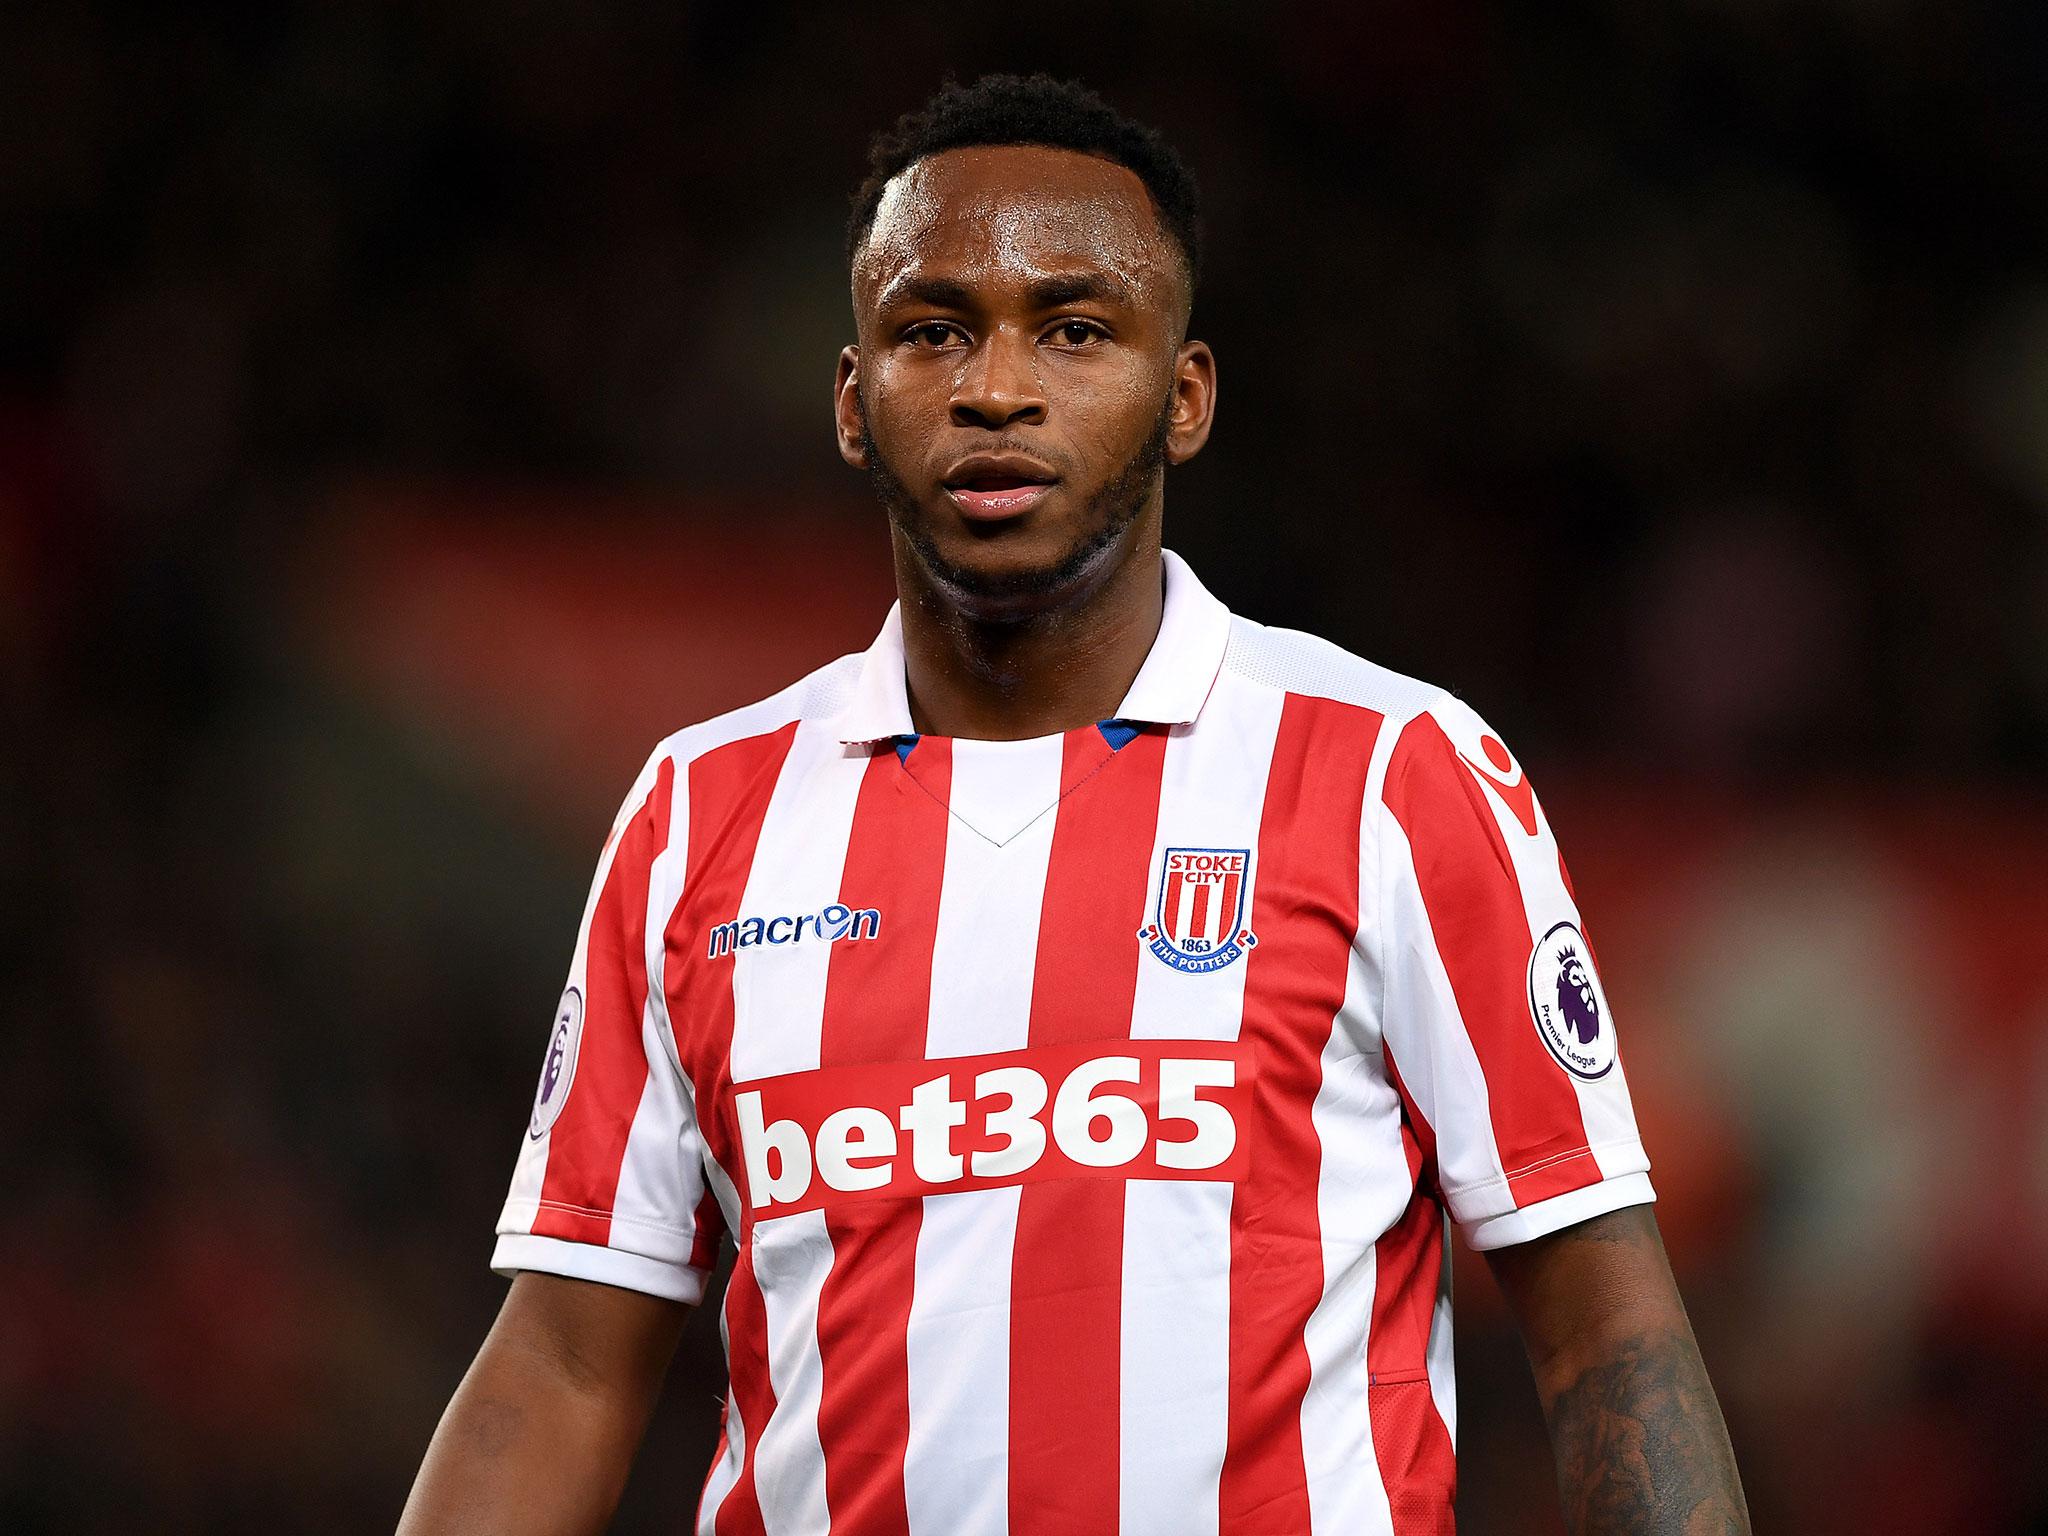 Saido Berahino failed a drugs test while at West Brom